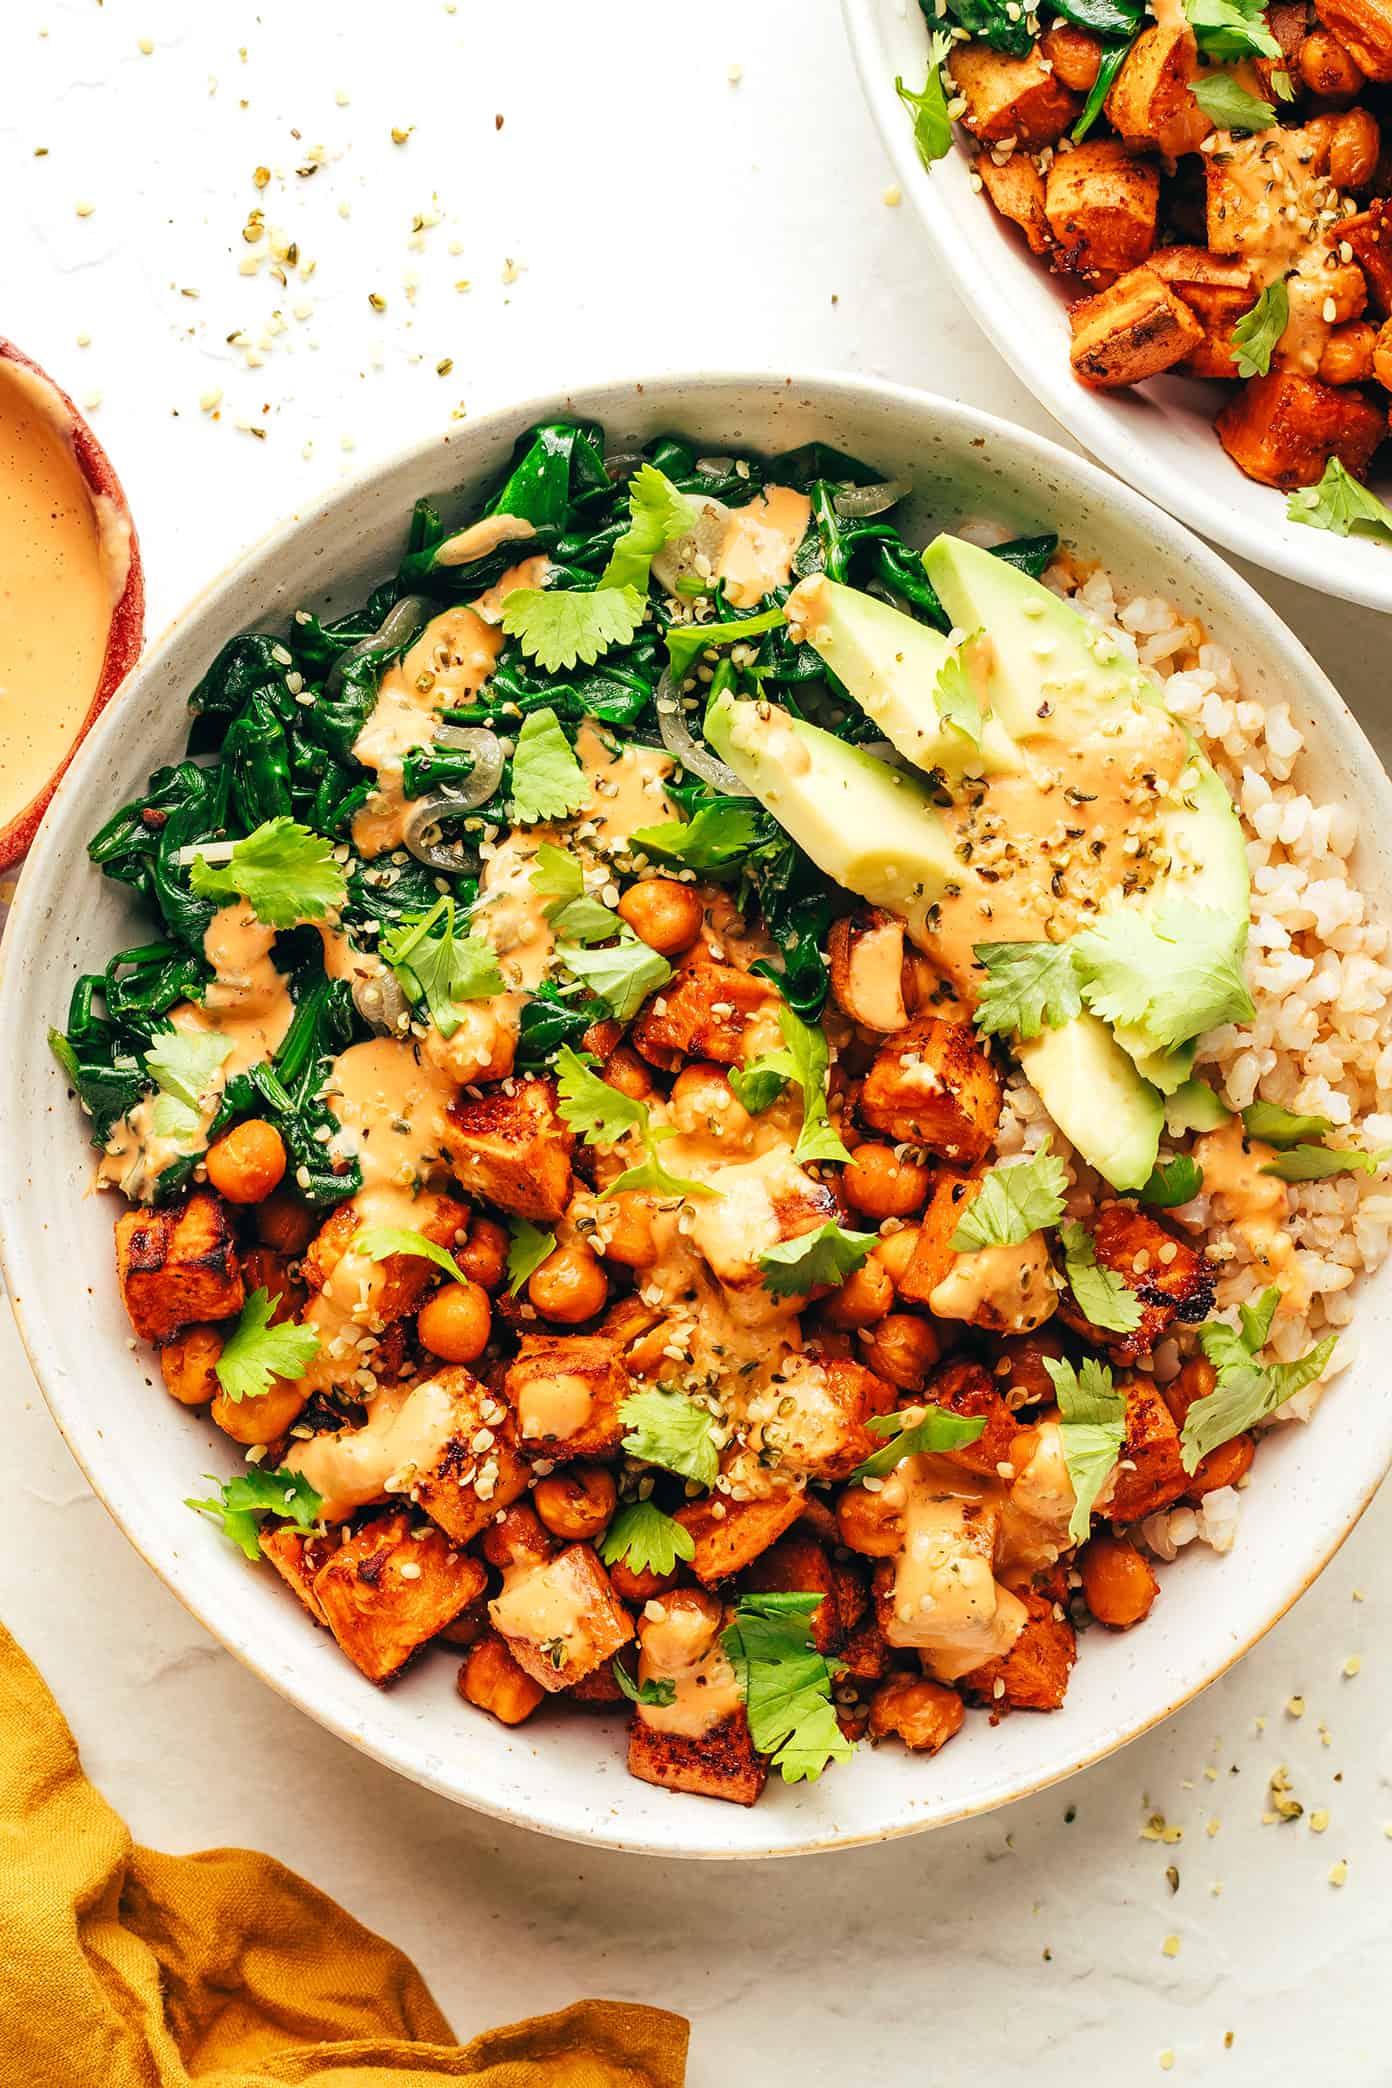 Roasted Sweet Potato and Chickpea Bowls Recipe | Gimme Some Oven